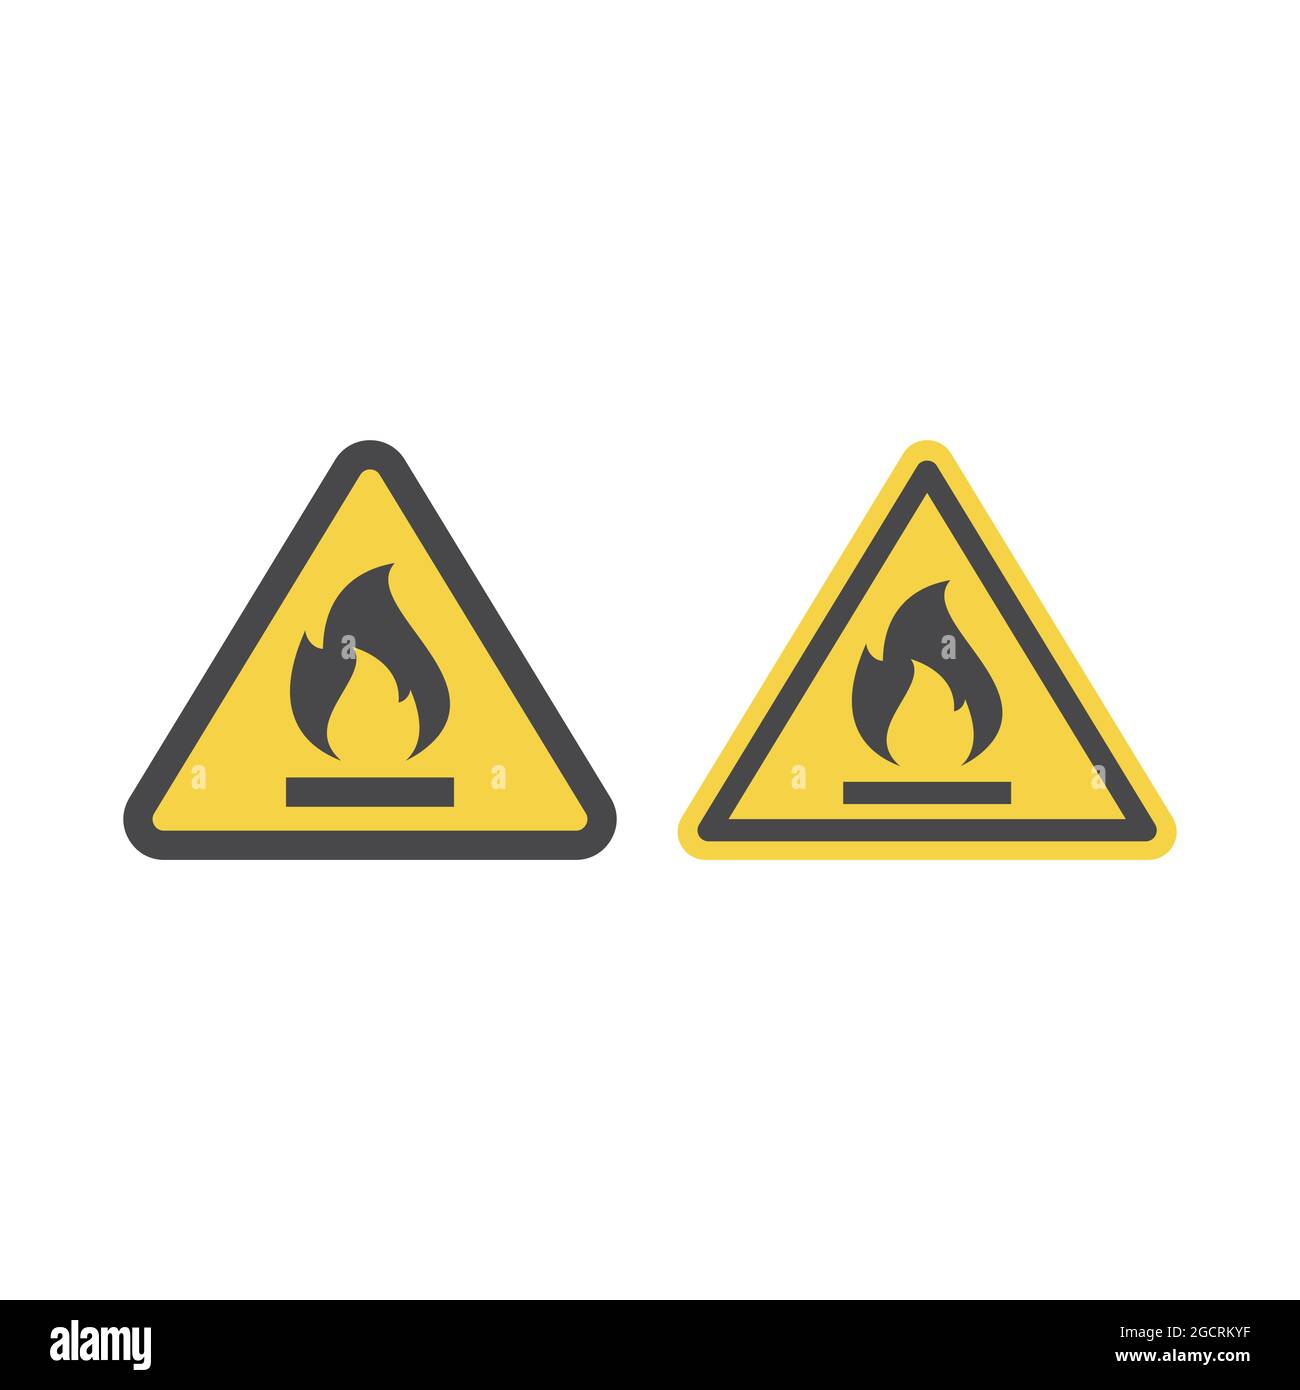 Highly flammable gas or liquid vector sign. Fire warning sign with flame in yellow and triangle. Stock Vector